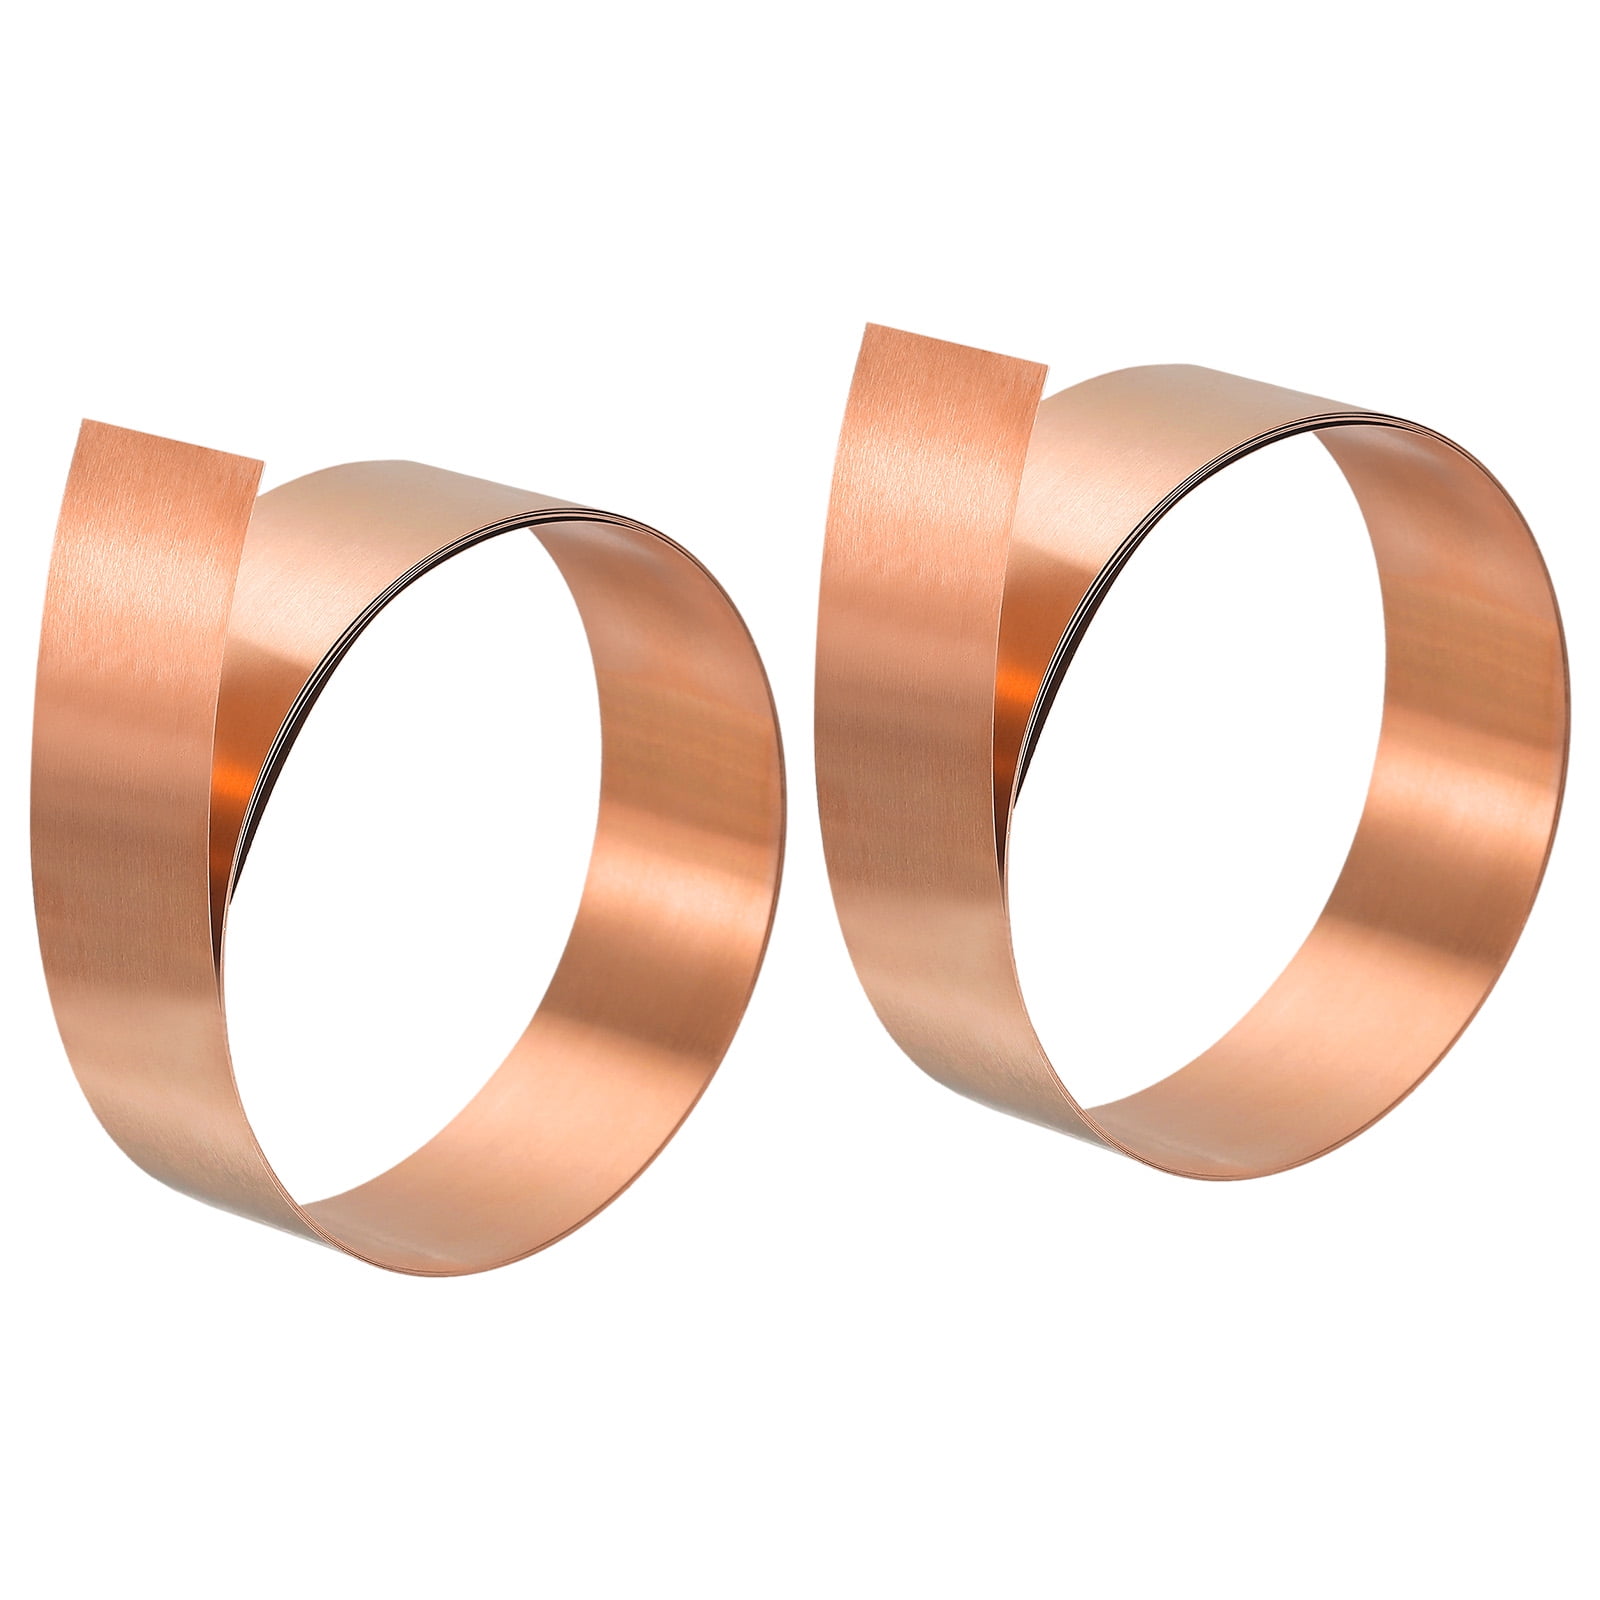 Uxcell Copper Thin Foil Roll Sheet, 0.3x20x1000mm Pure Copper Foil Sheet  Roll Copper Strip 